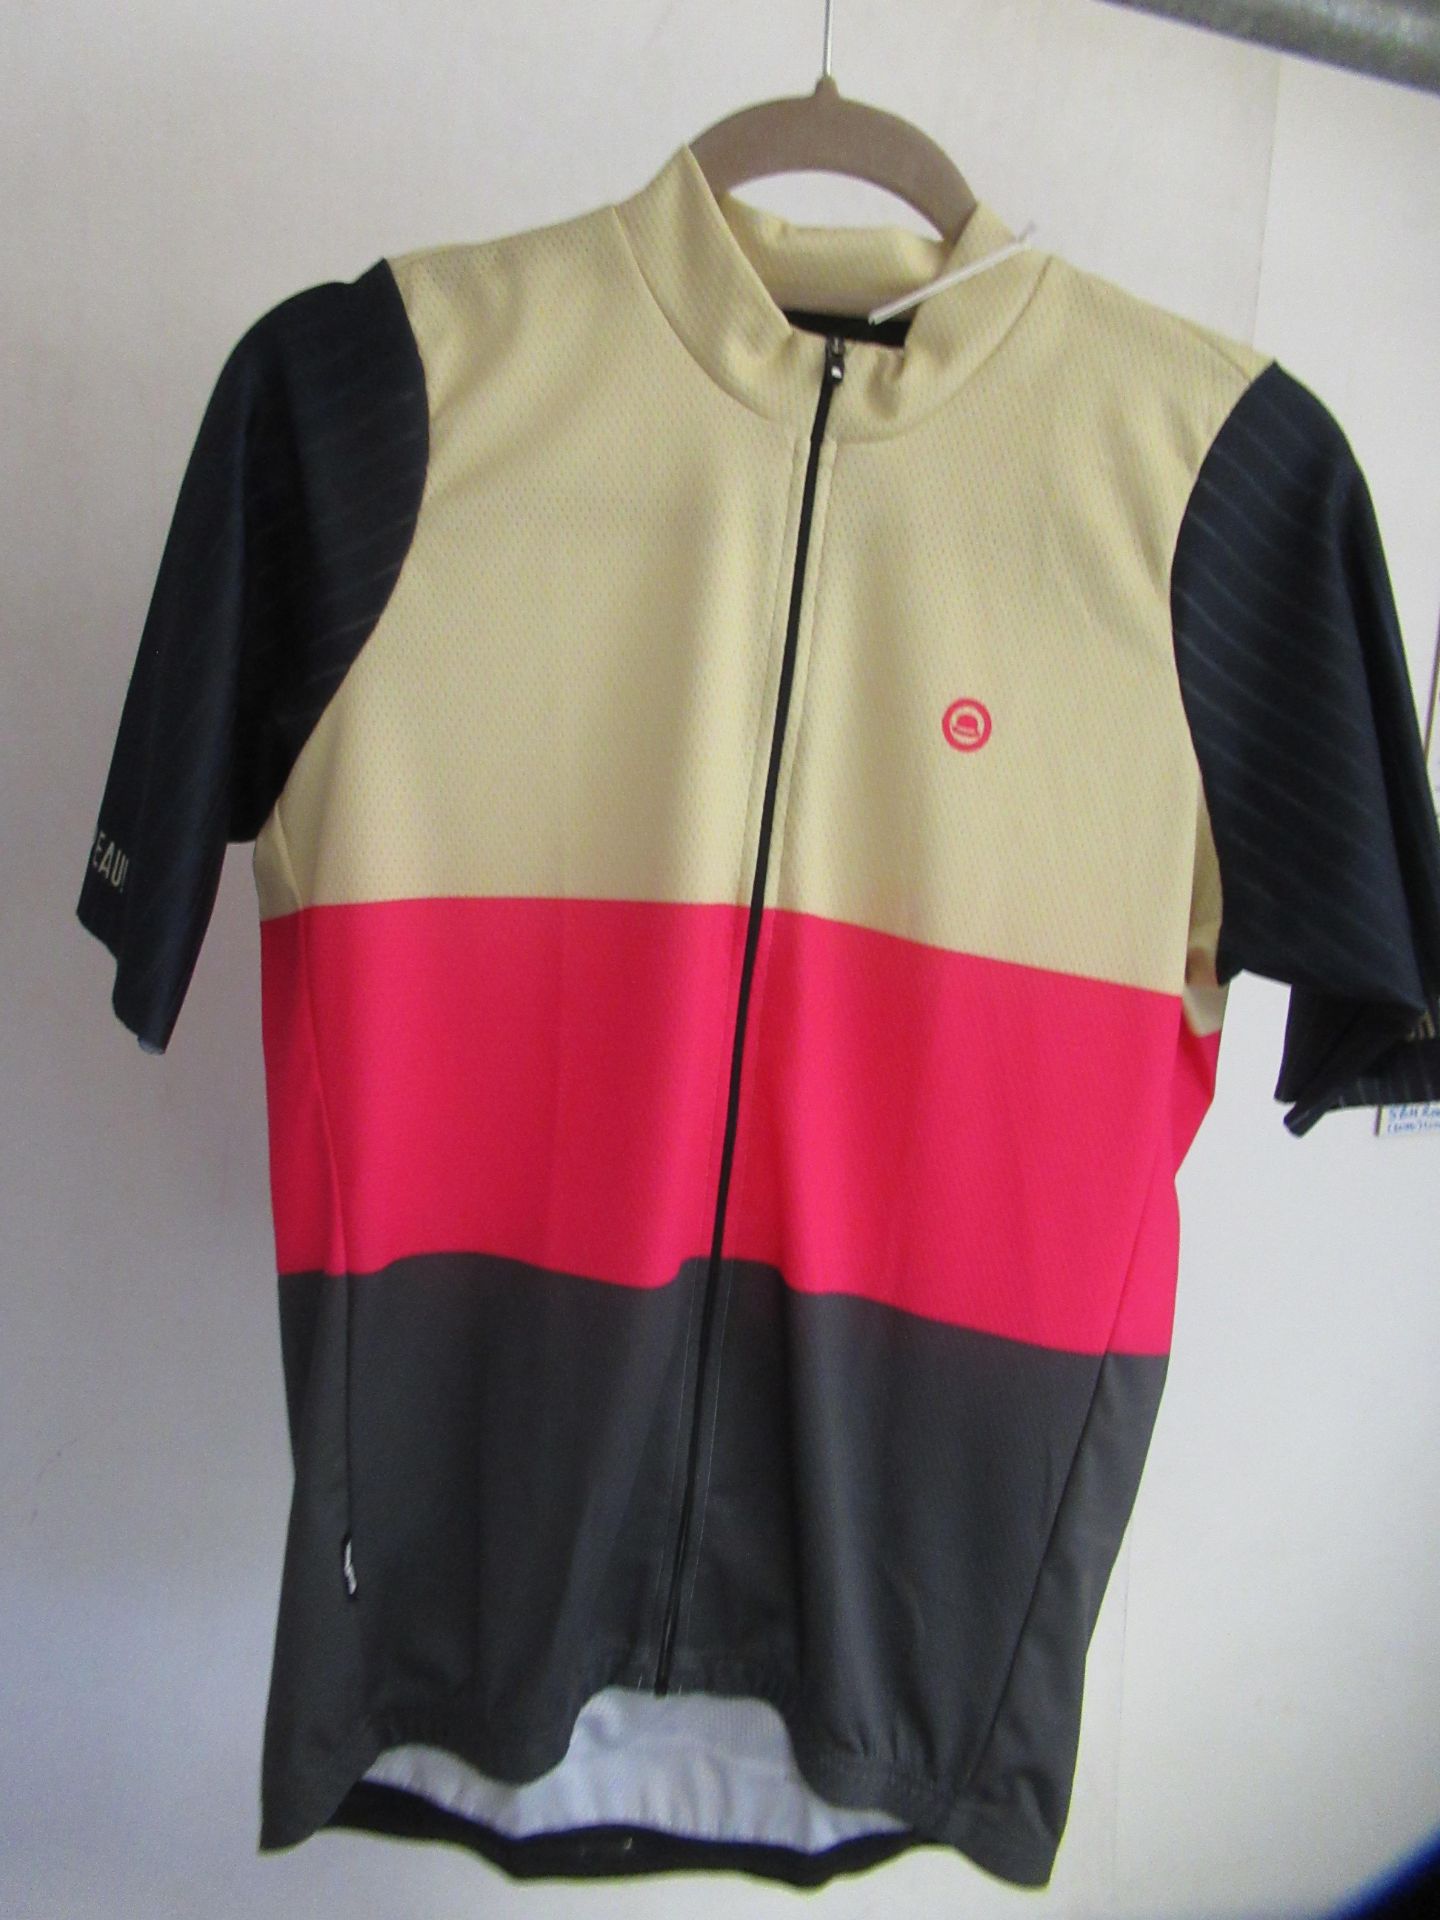 L Male Cycling Clothes - Image 6 of 6